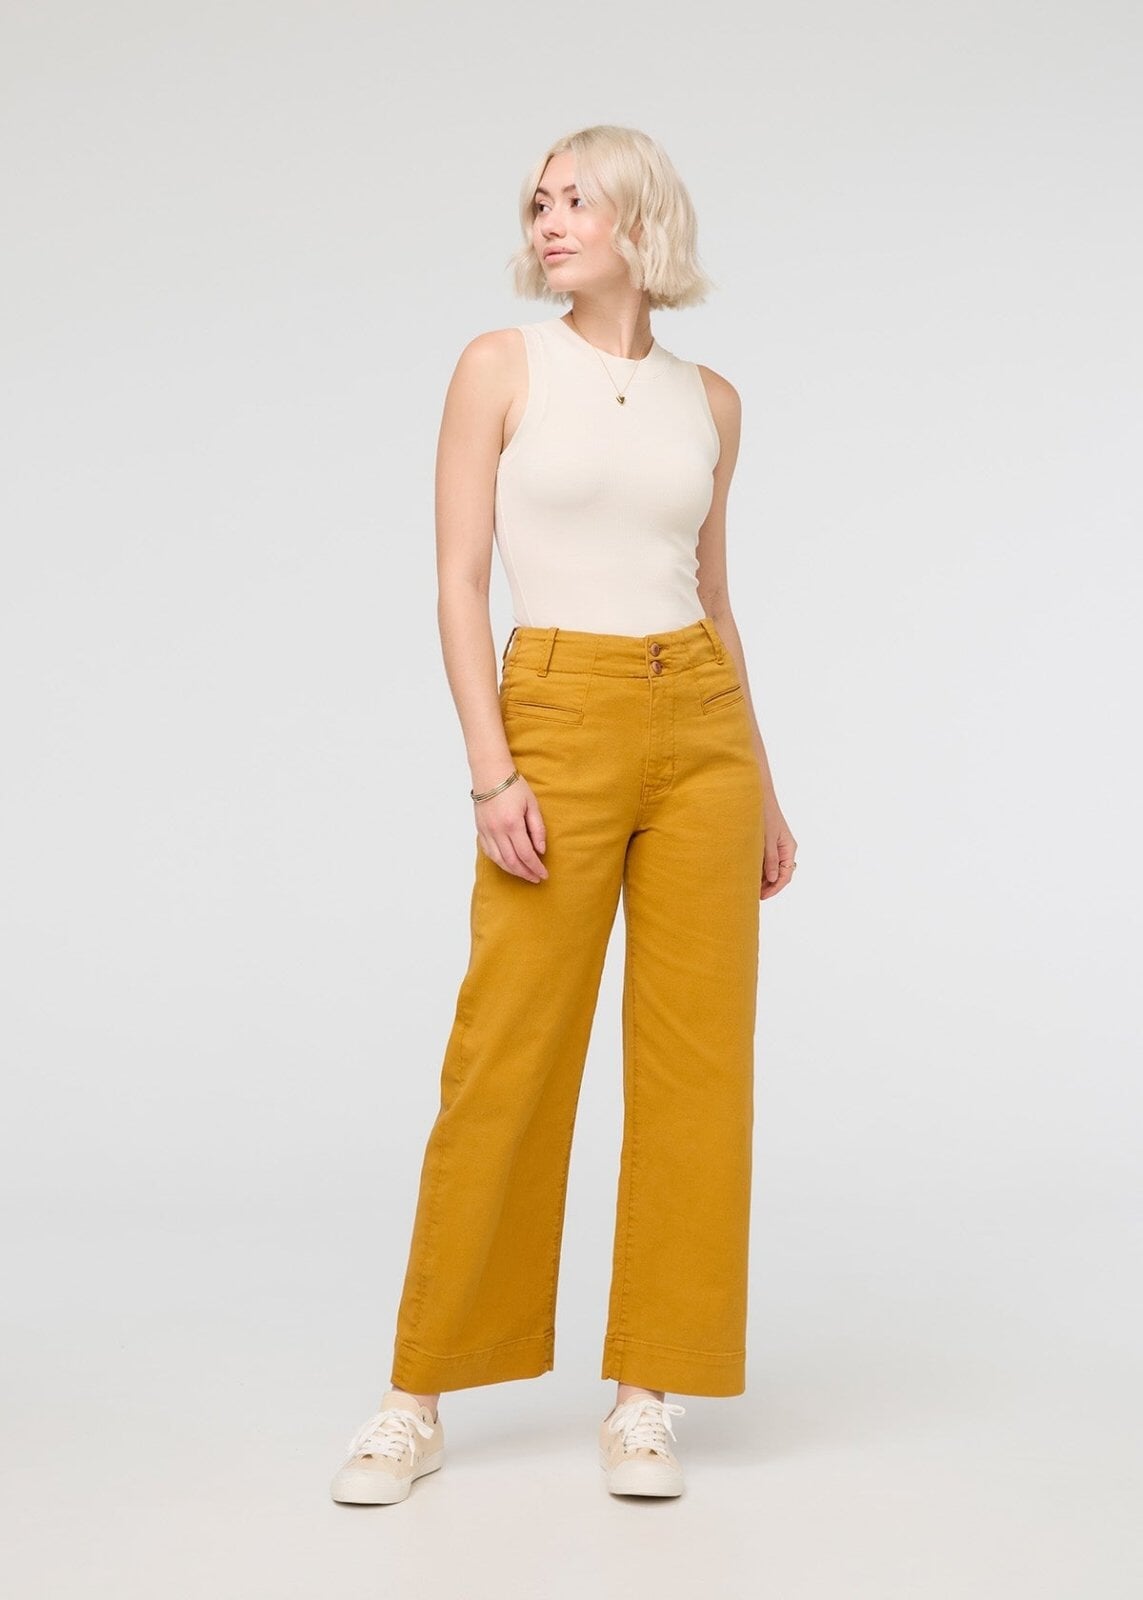 Amedeo Trousers in Flamed Silk - Giuliva Heritage